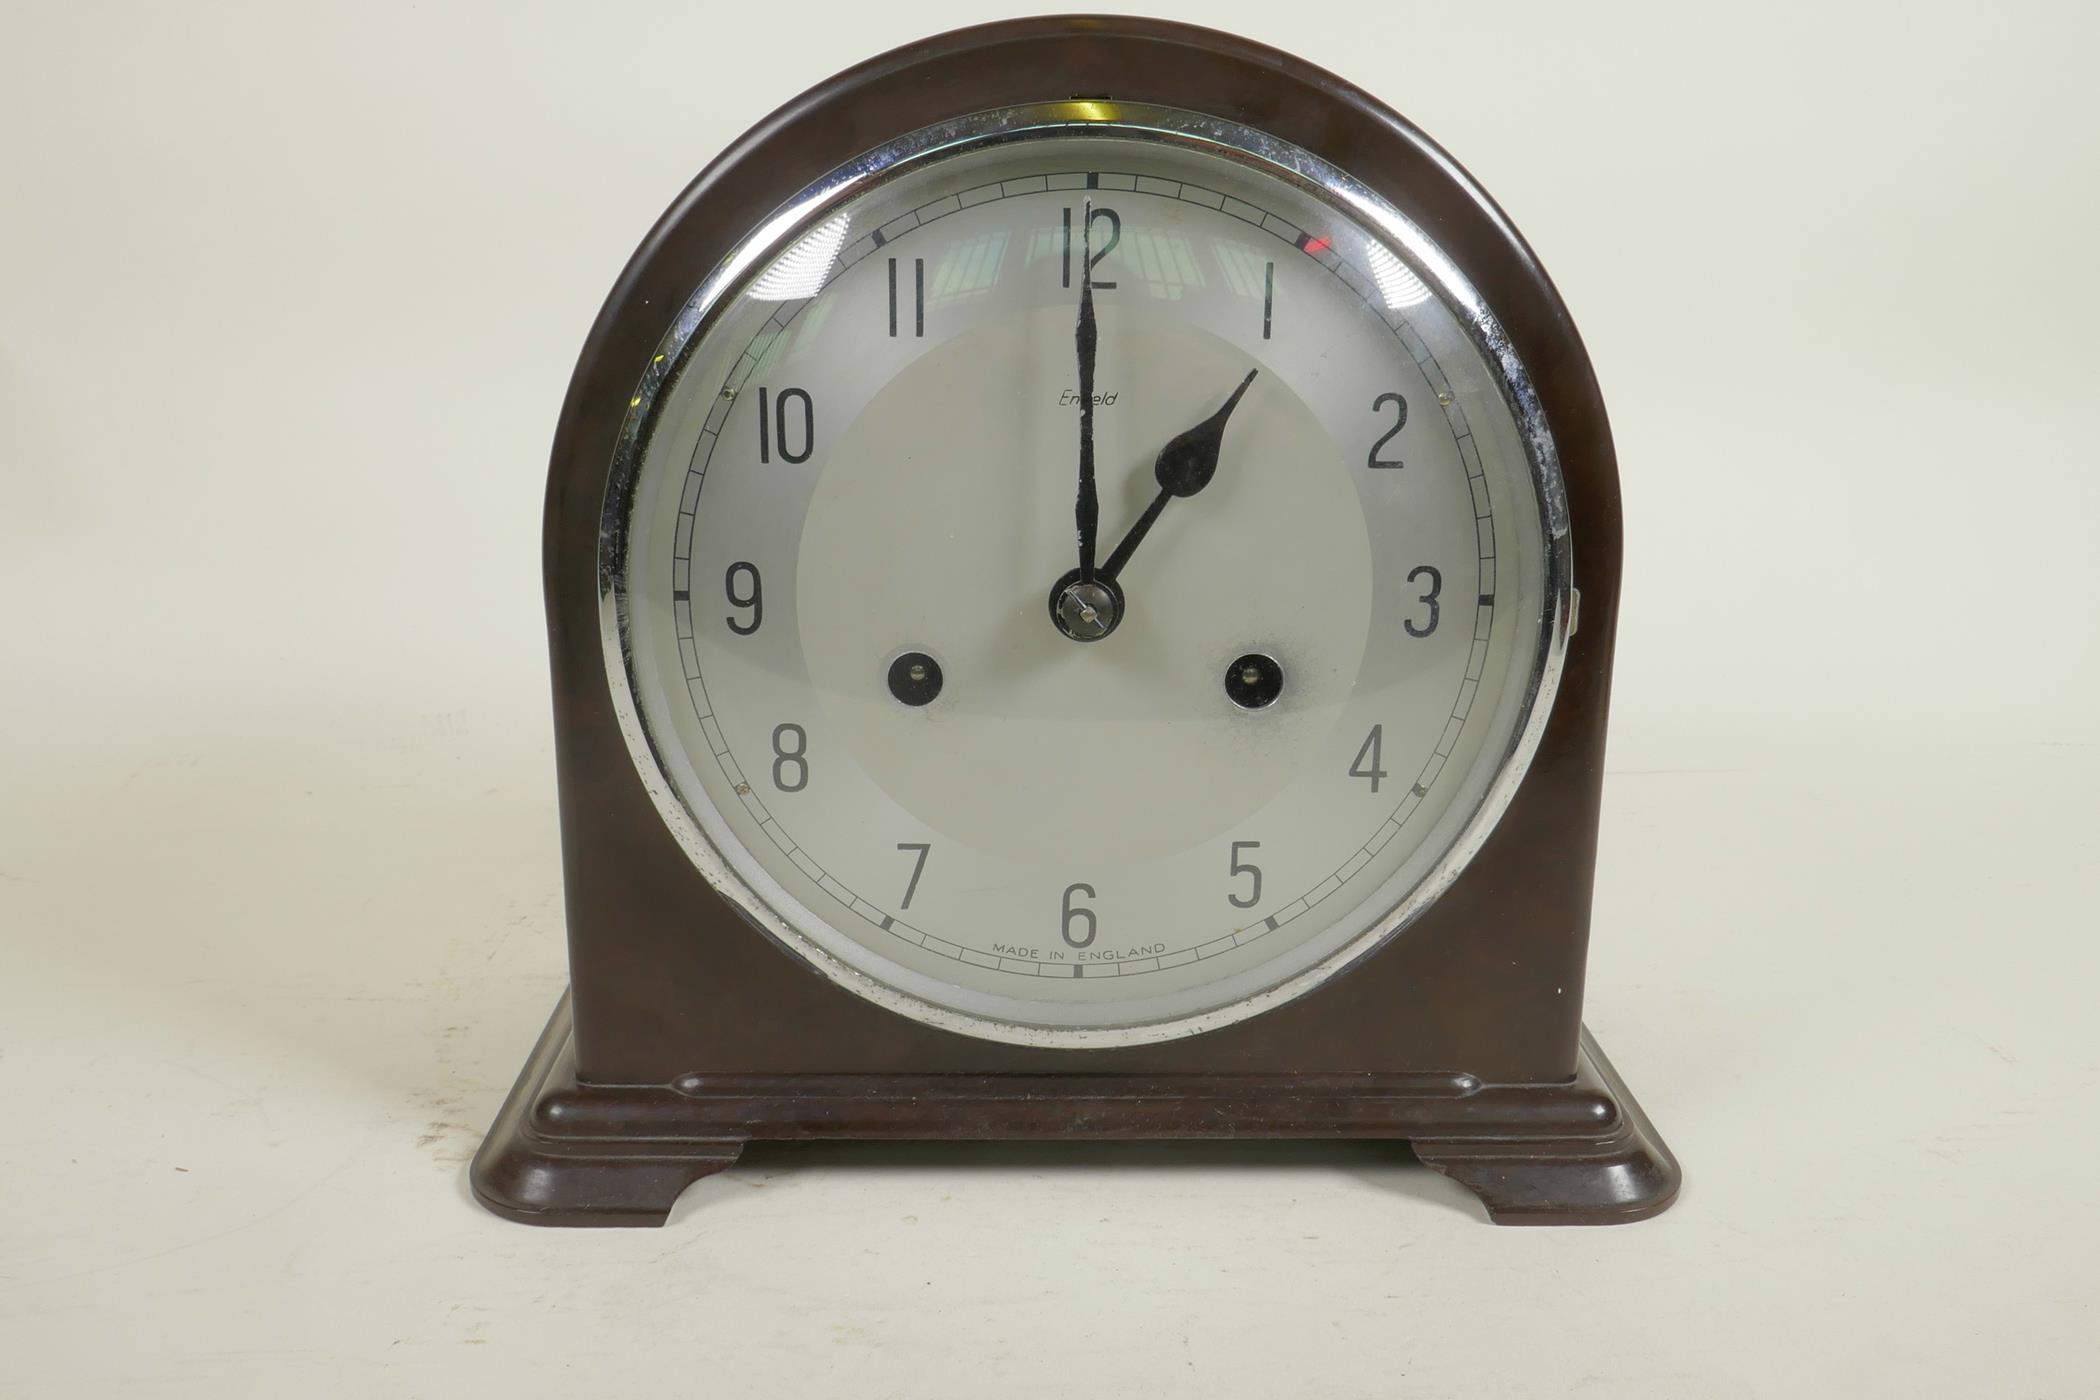 A mid C20th Smith's Enfield chiming mantel clock, dark wood effect bakelite casing and silver - Image 5 of 7